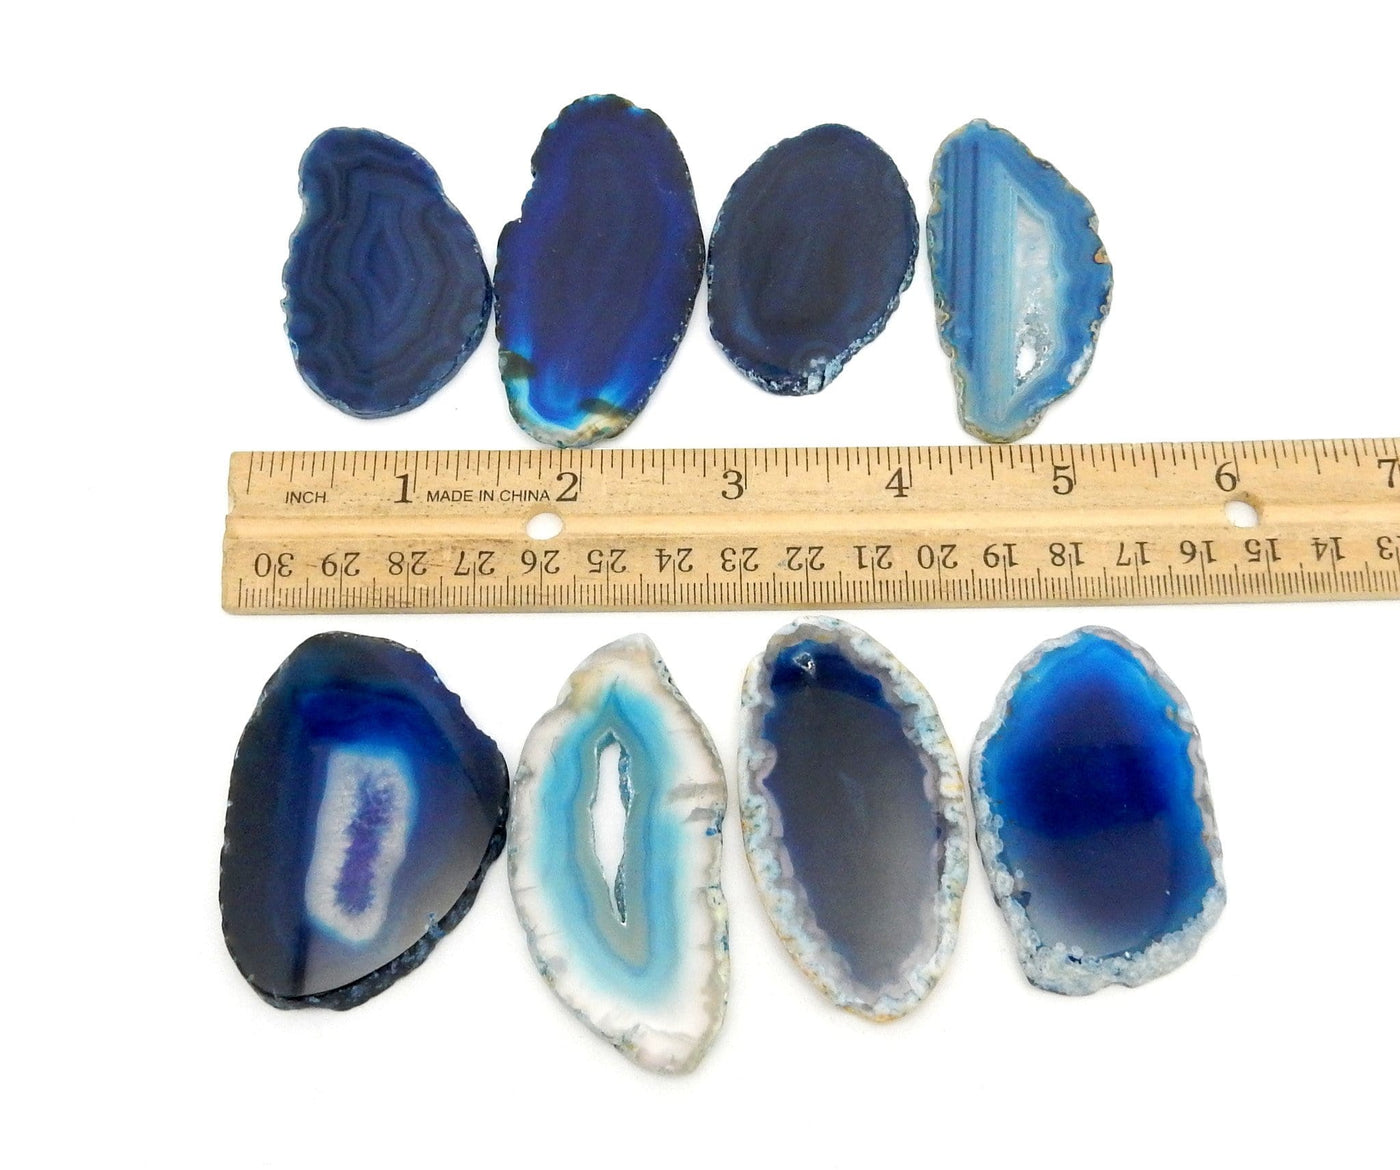 Picture of Blue agate slices on white back ground, next to ruler for size reference.